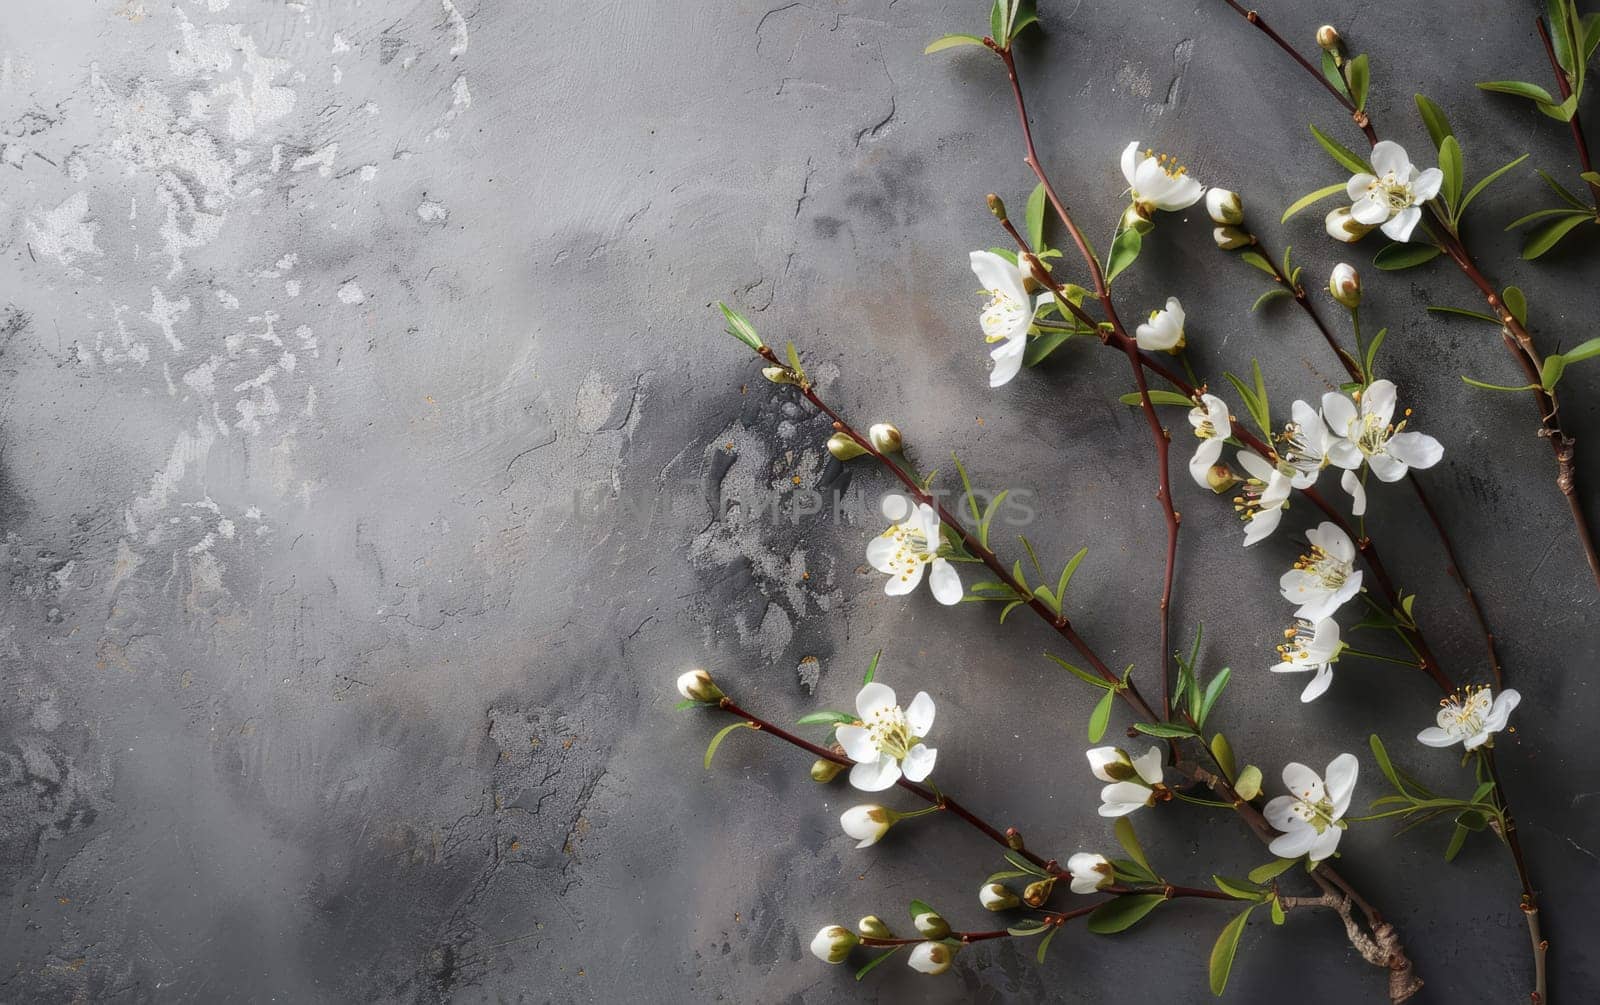 Delicate white spring blossoms are laid out across a rugged concrete texture, creating a contrast between nature and urbanity. The blossoms offer a sense of renewal amidst the stark grey background by sfinks